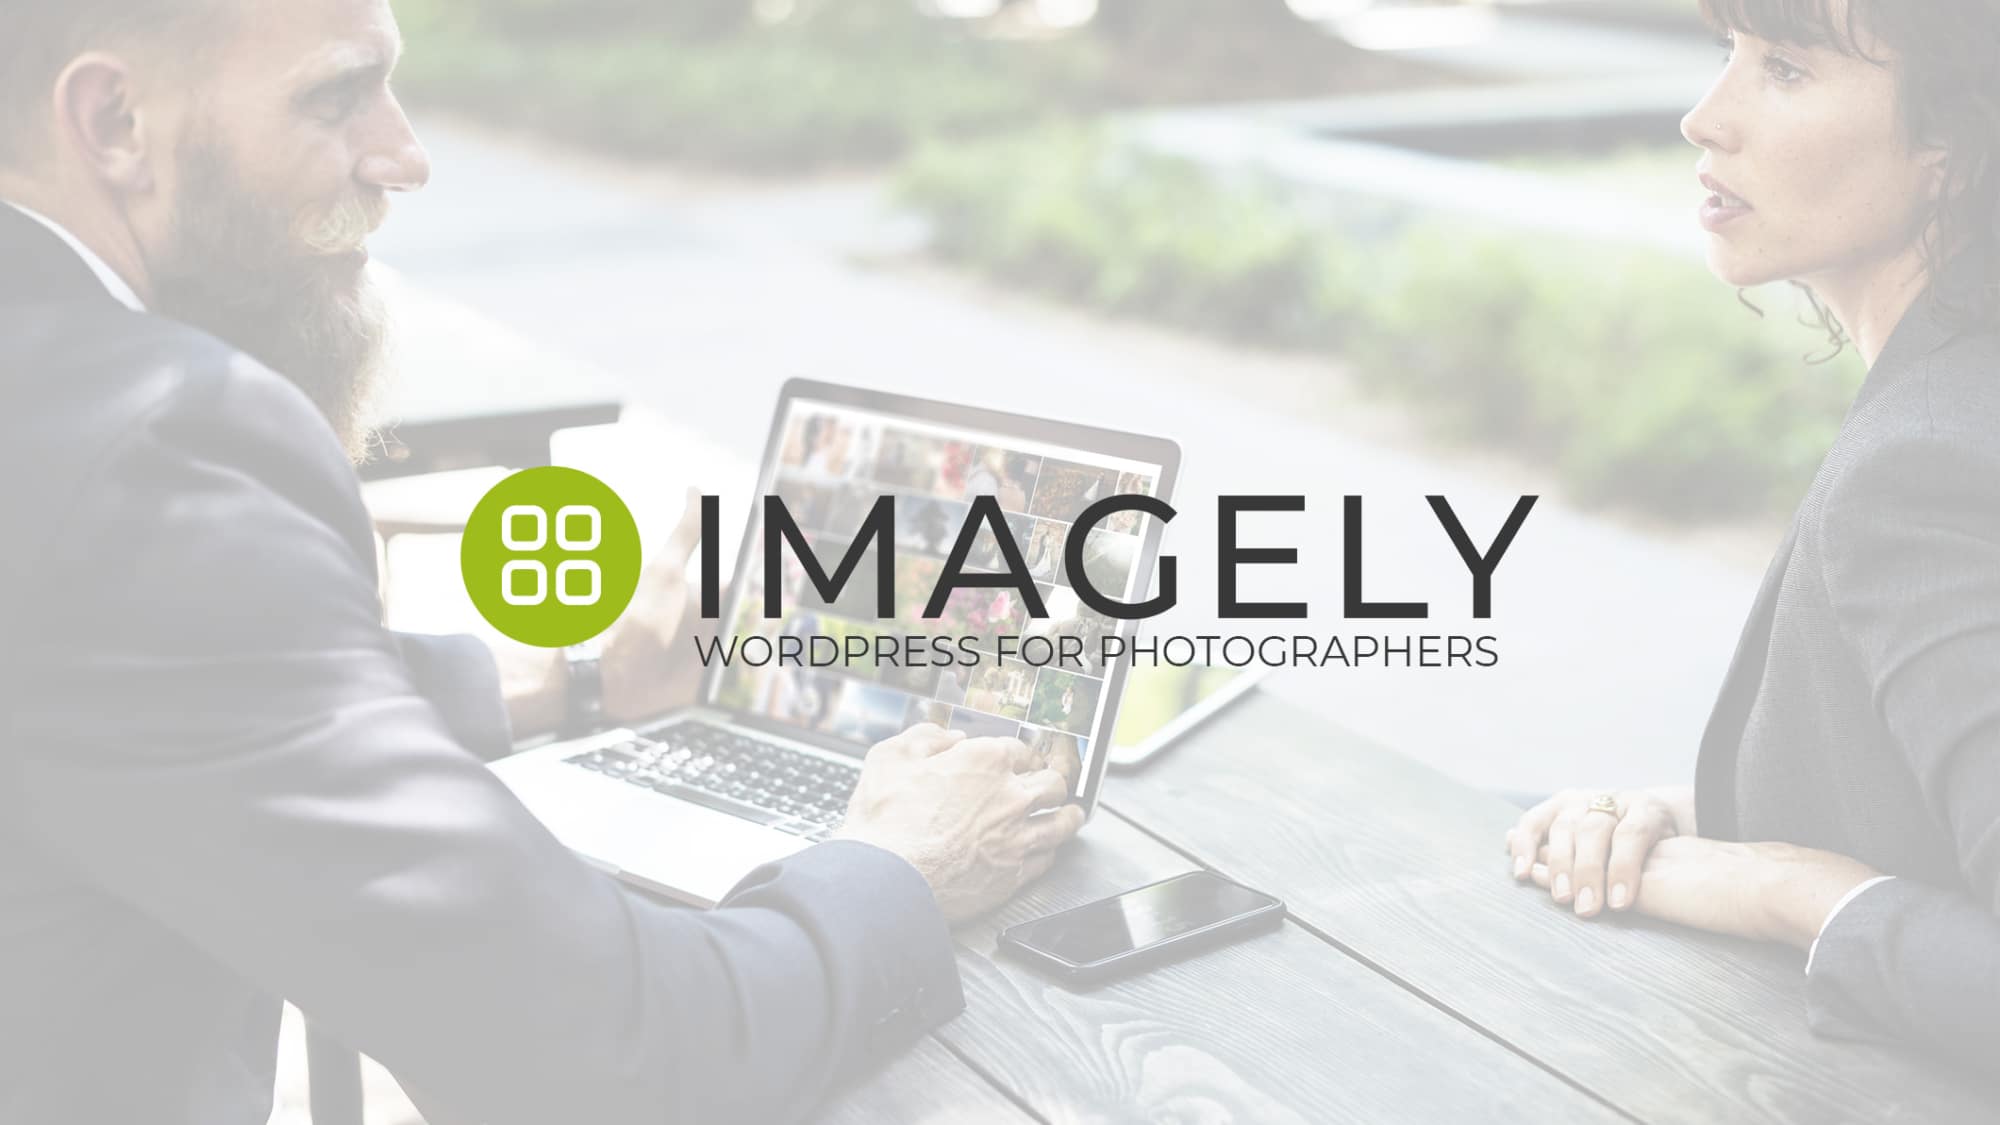 Save On Imagely Hosting by Paying Annually